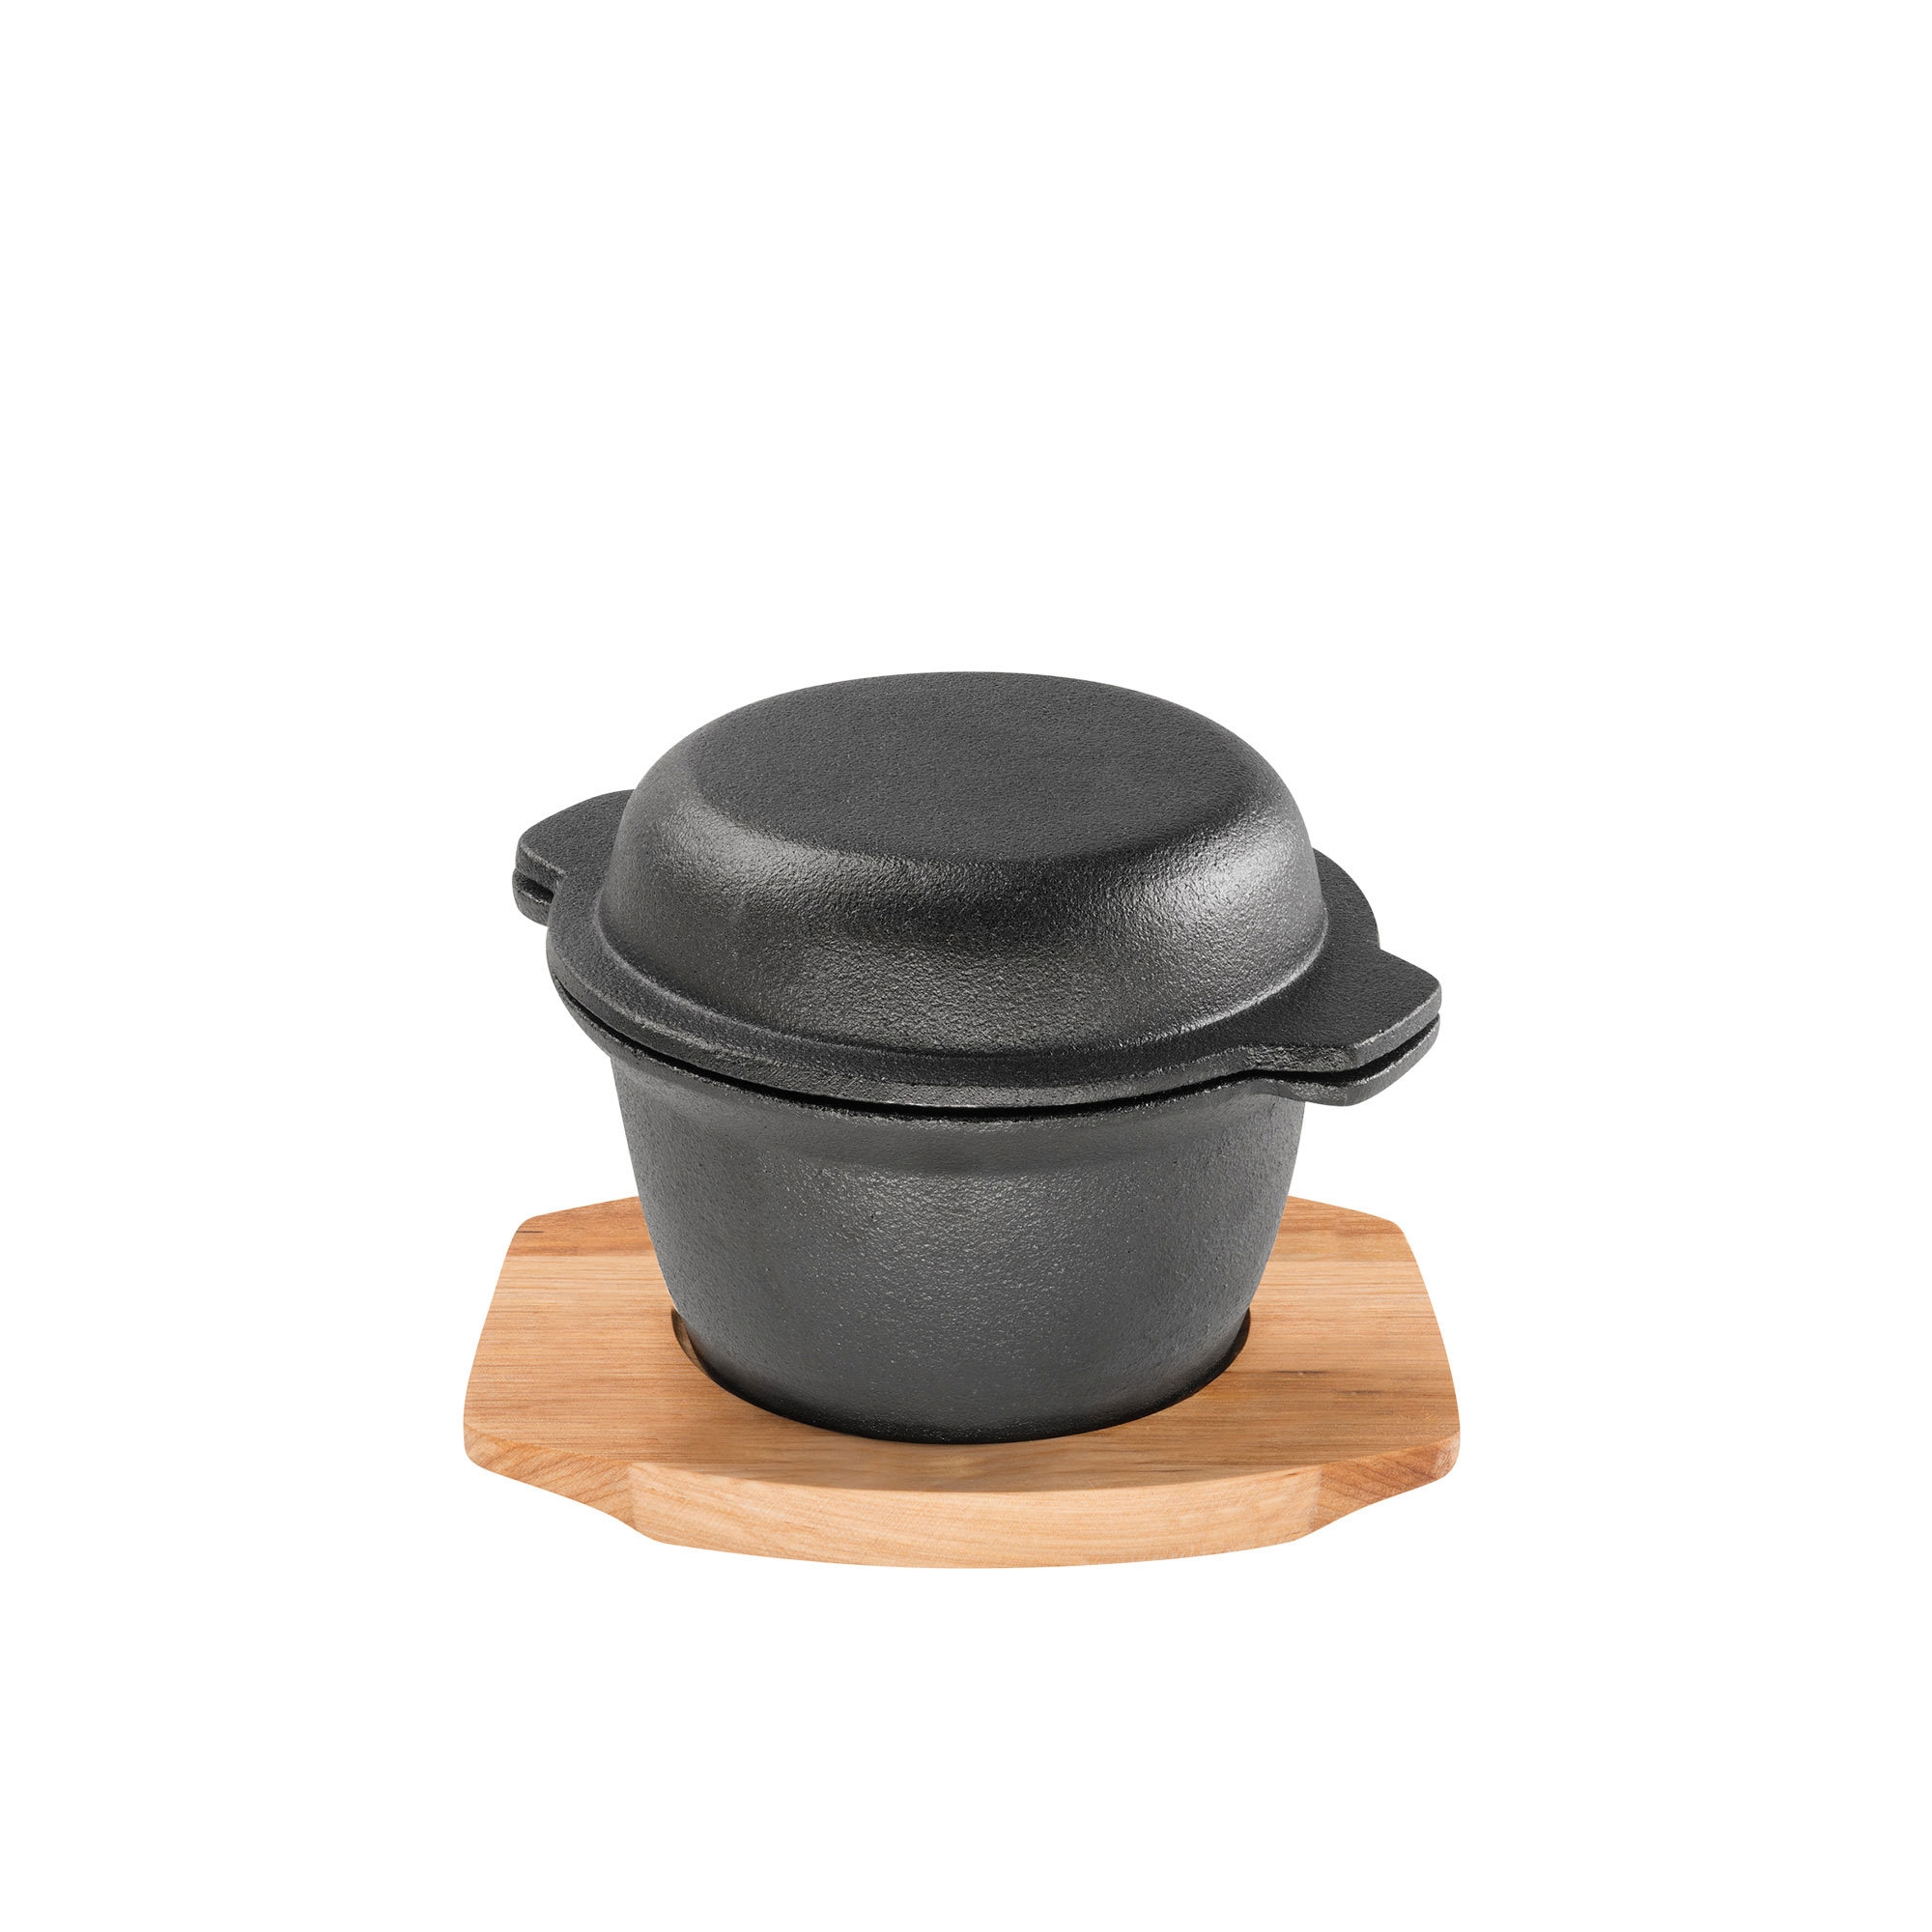 Pyrolux Pyrocast Cast Iron Garlic Pot Wooden Base with Maple Tray Image 1